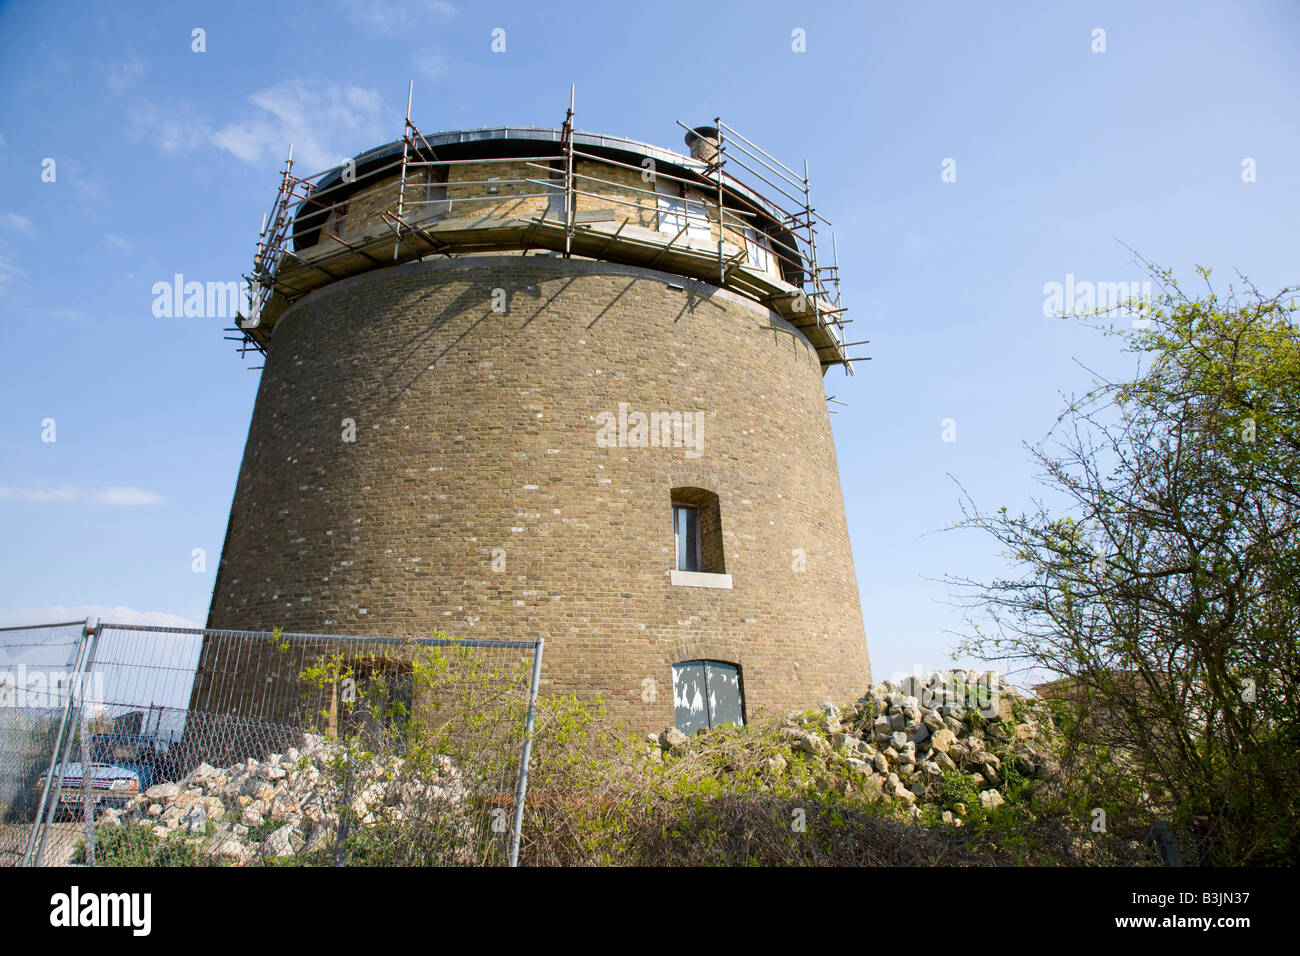 Martello Tower a military structure undergoing conversion into a residential dwelling Stock Photo